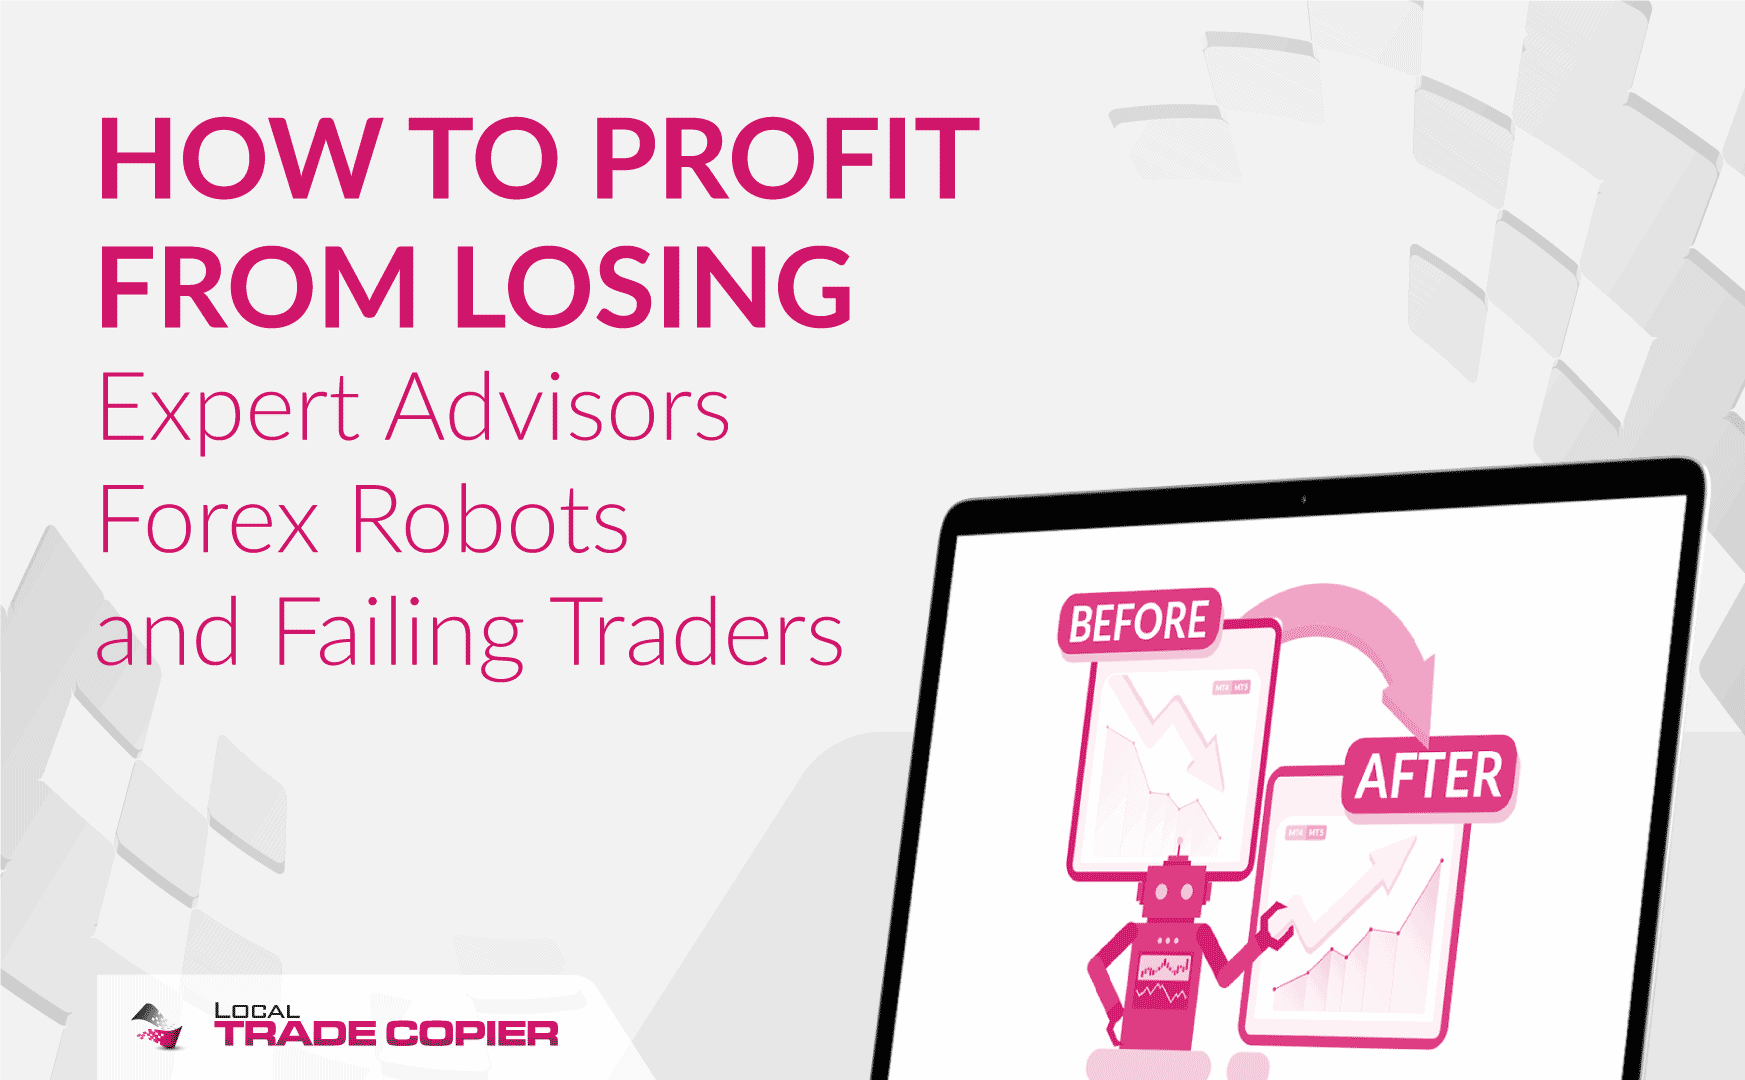 How to profit from losing Expert Advisors, Forex Robots, and Failing Traders